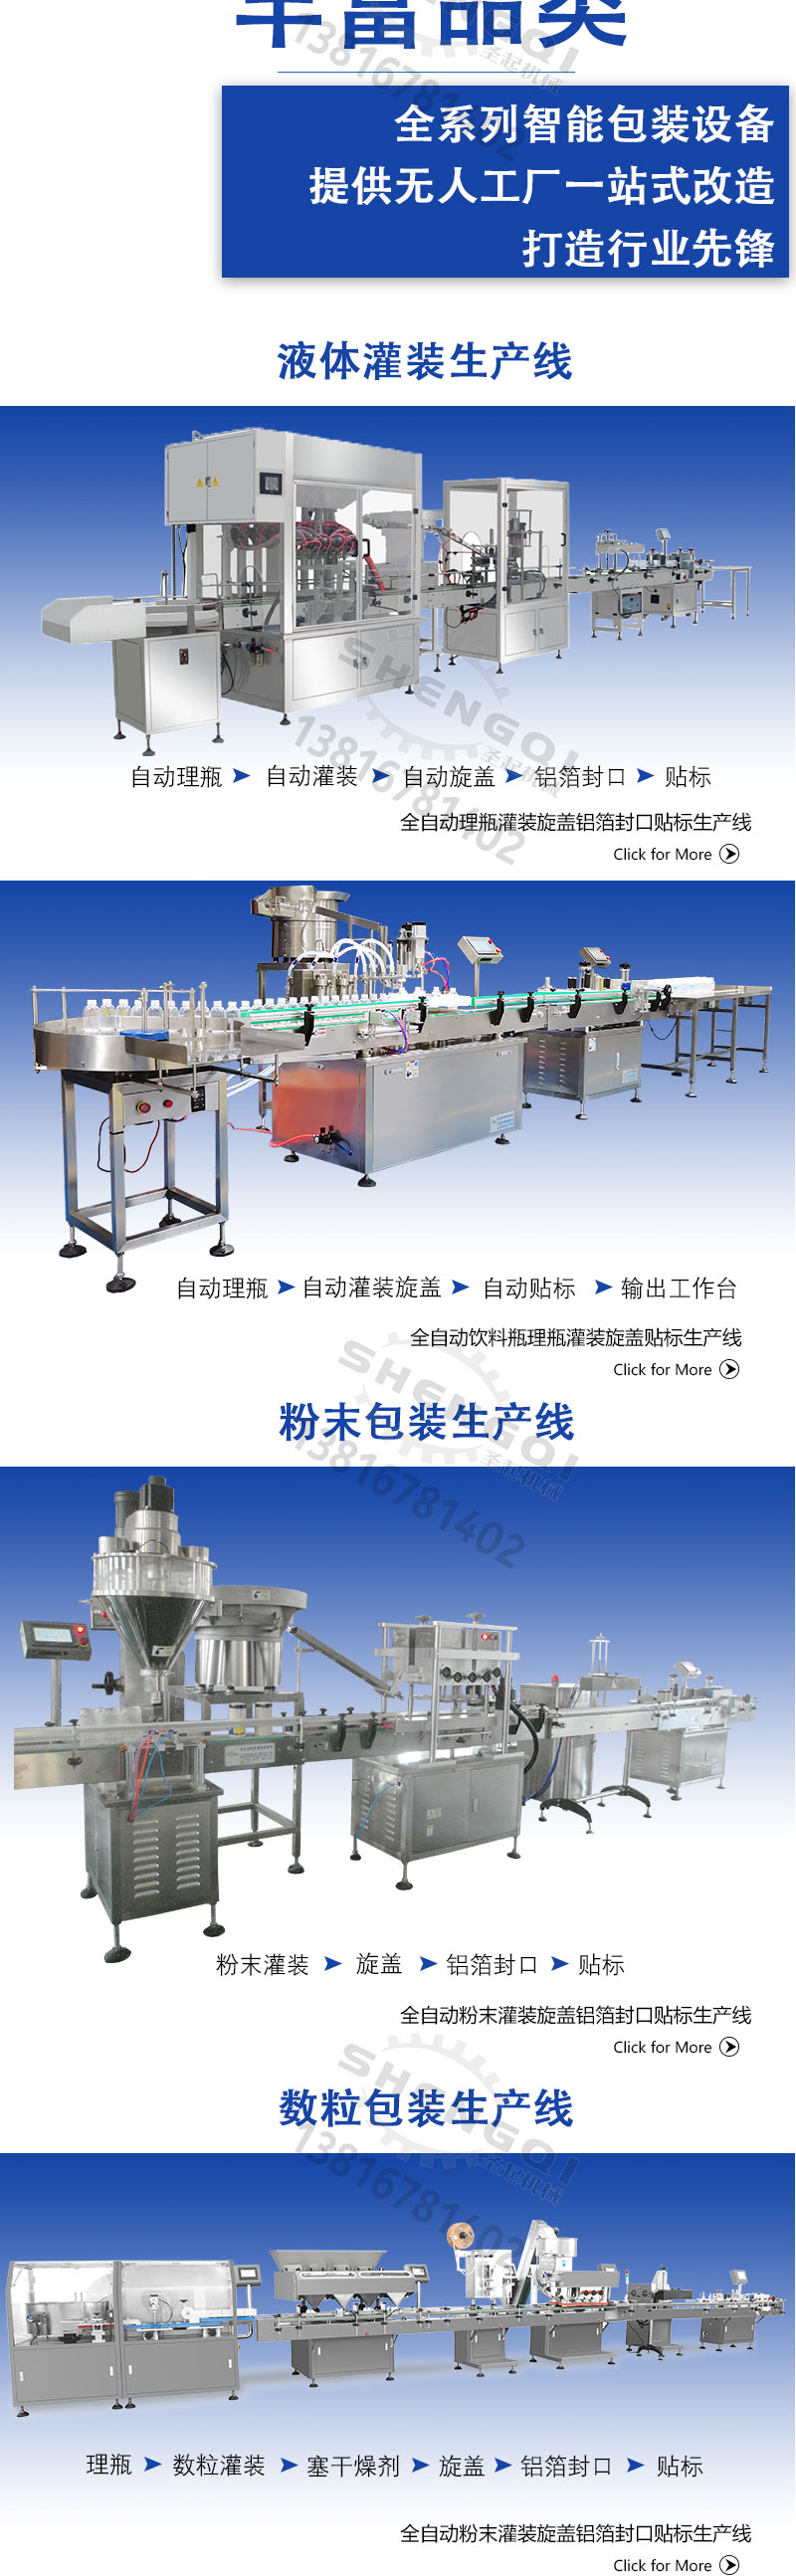 Fully automatic box filling machine for food automatic box filling and packaging machinery coffee bar solid beverage box filling and sealing machine